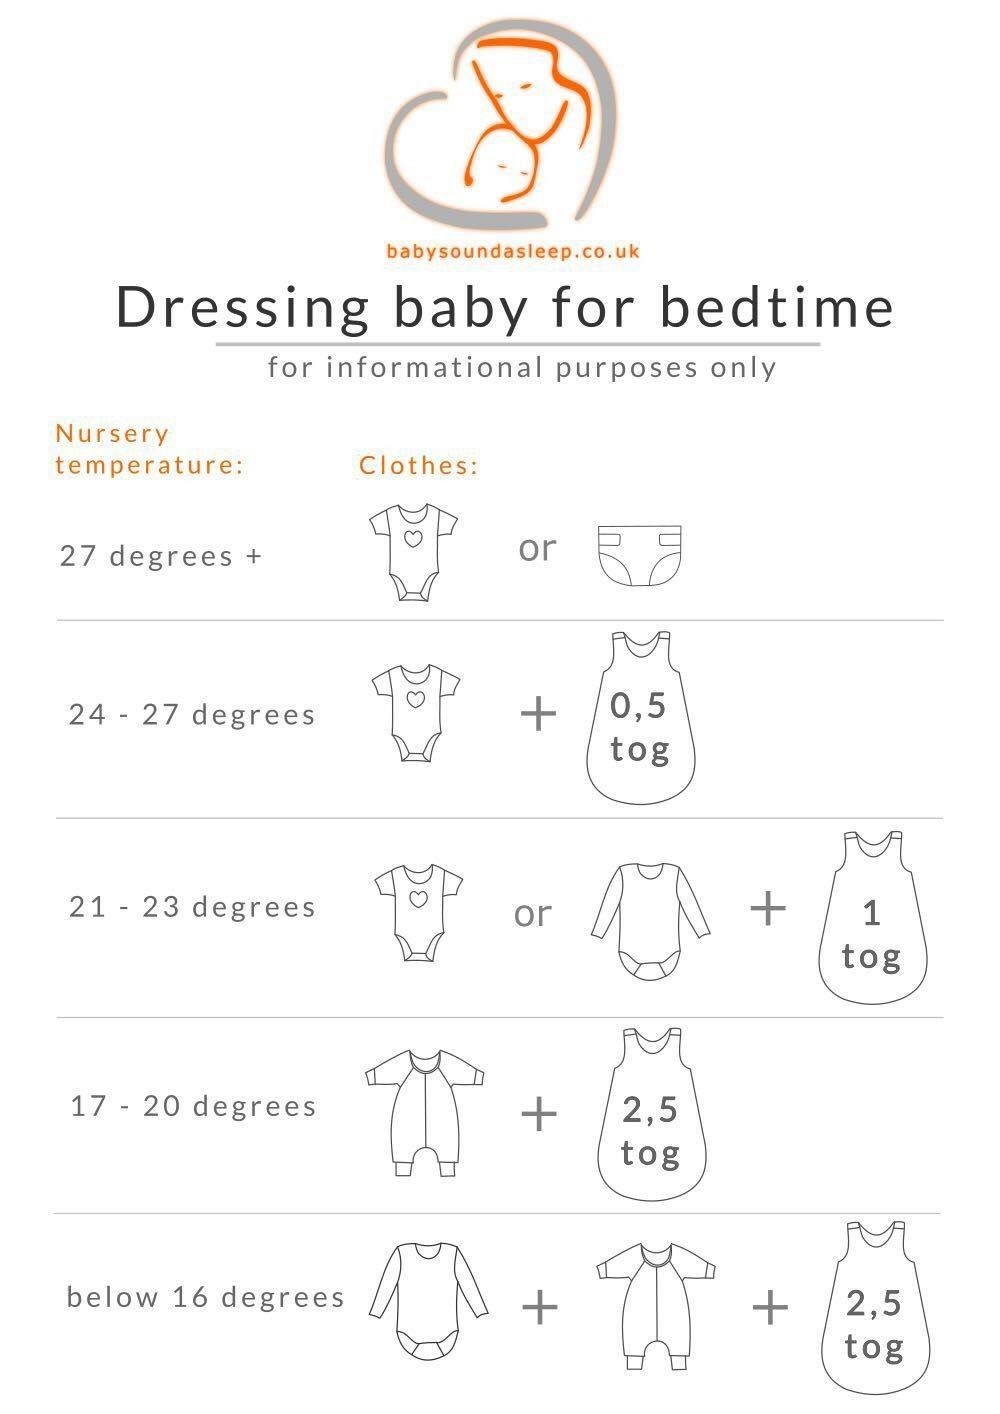 Dressing baby for bedtime, temperature guide.